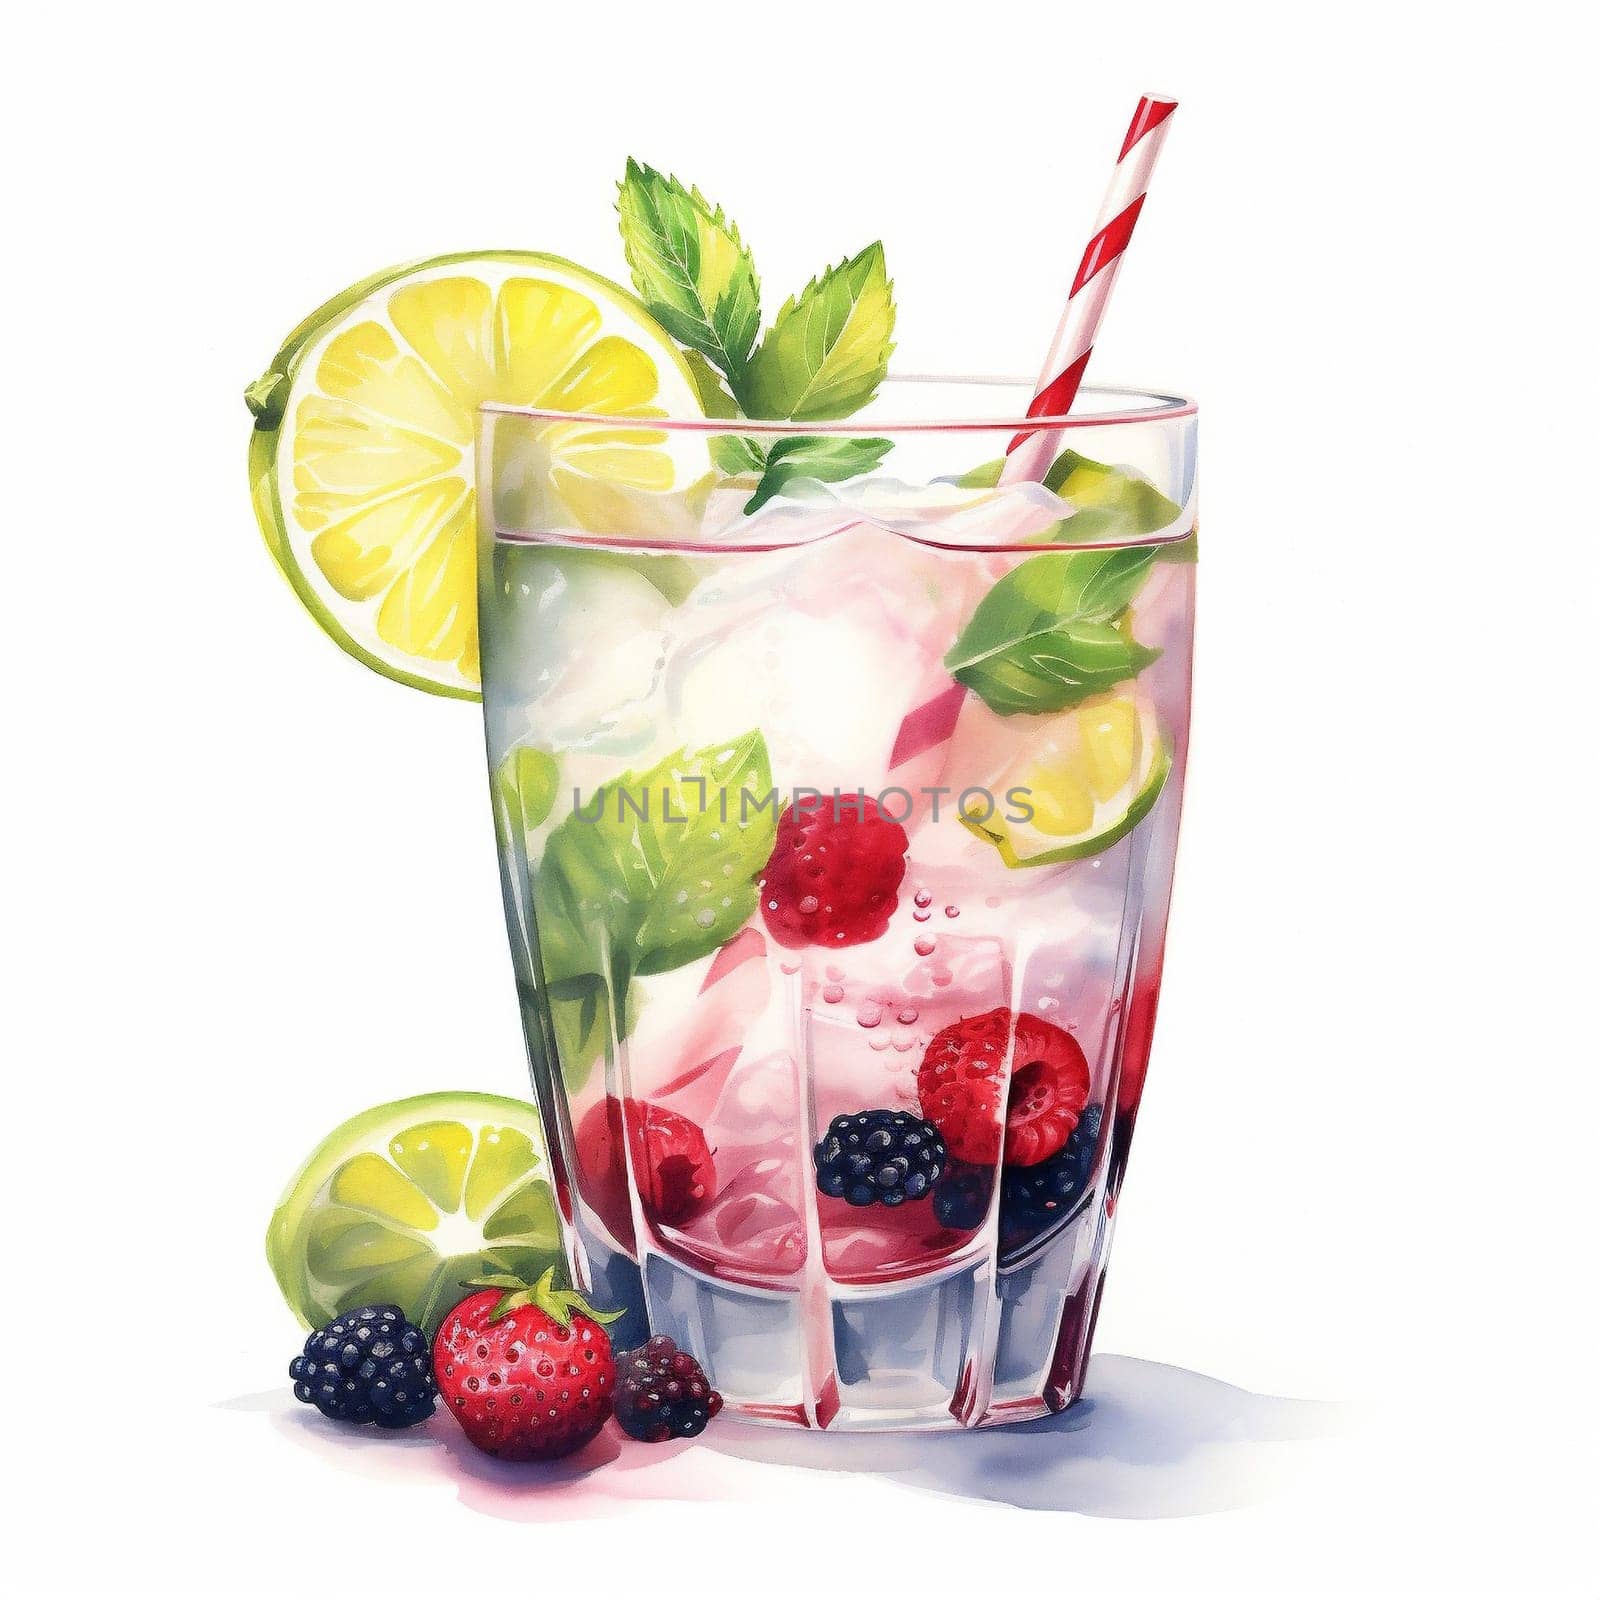 Cocktail Day with Berries, Fruits and Mint Leaves. Hand Drawn Coctail Day Sketch on White Background.